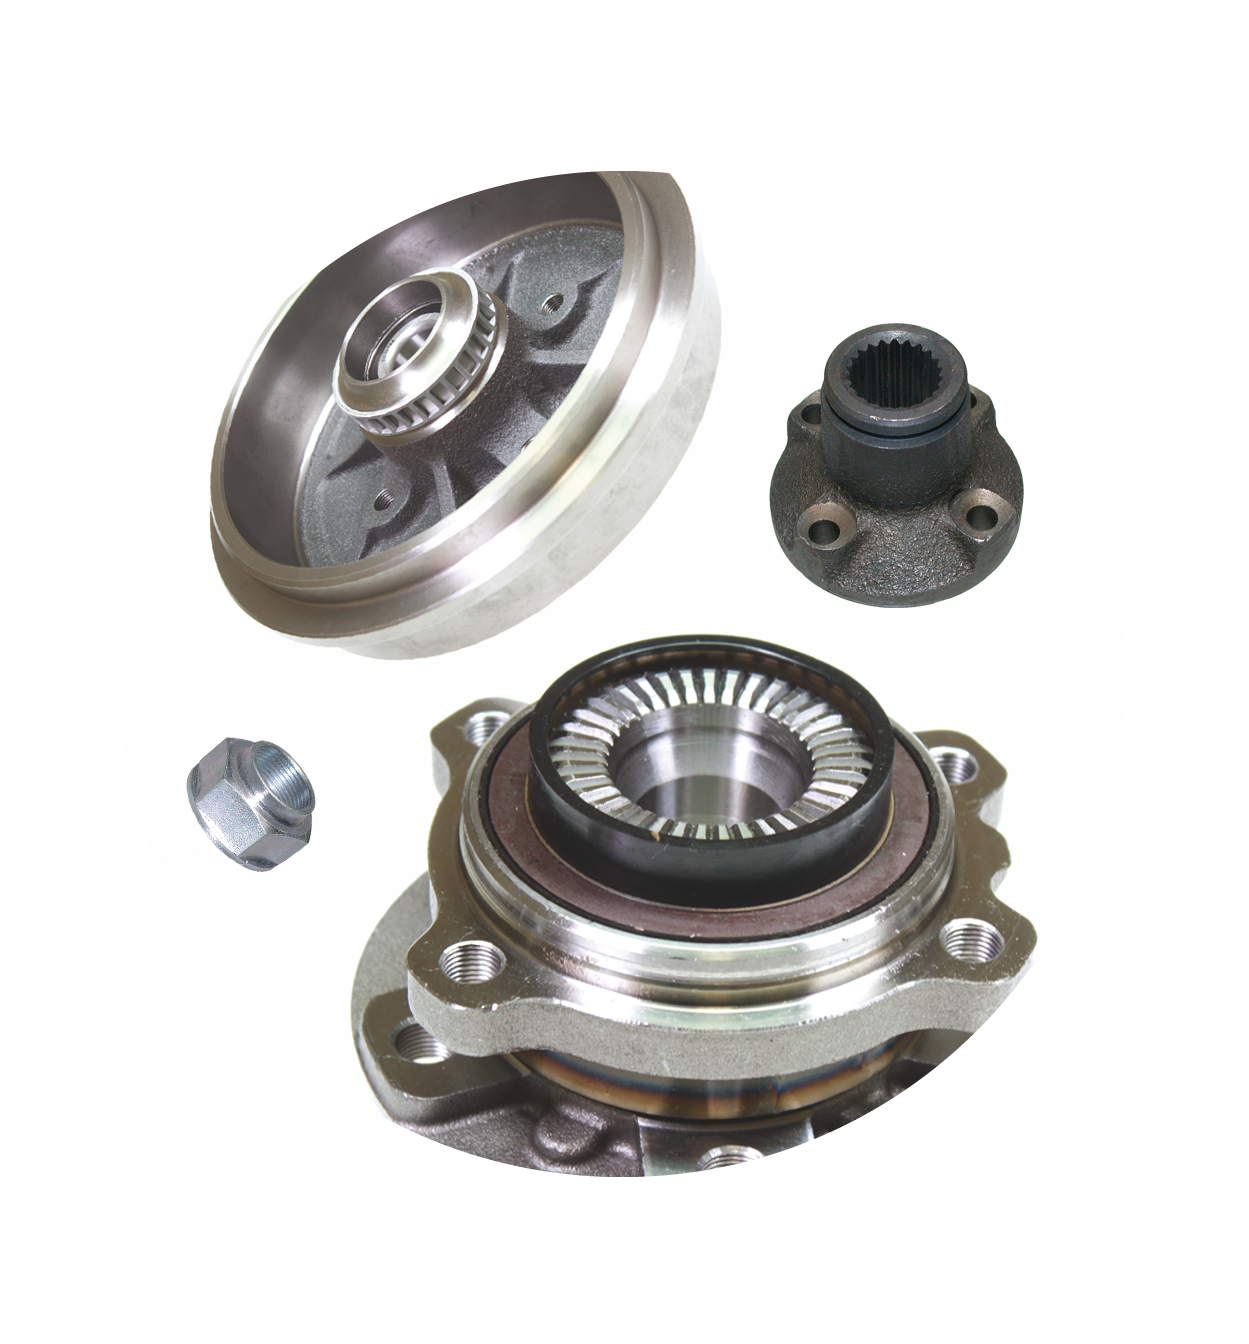 Wheel Hubs and Transmission Parts